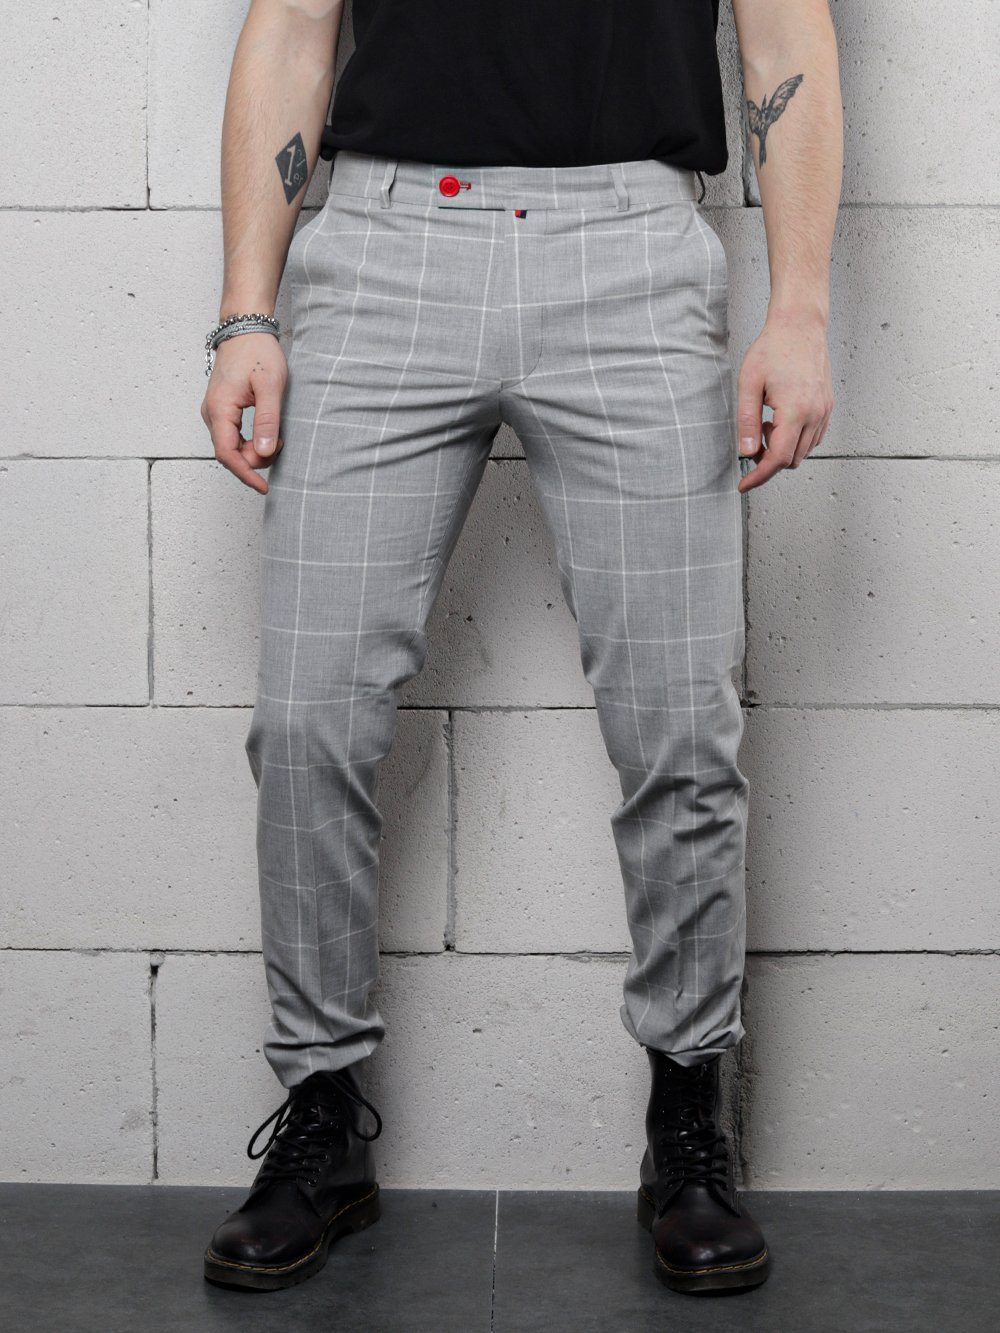 A man is standing against a brick wall wearing ICED AMERICANO PANTS.